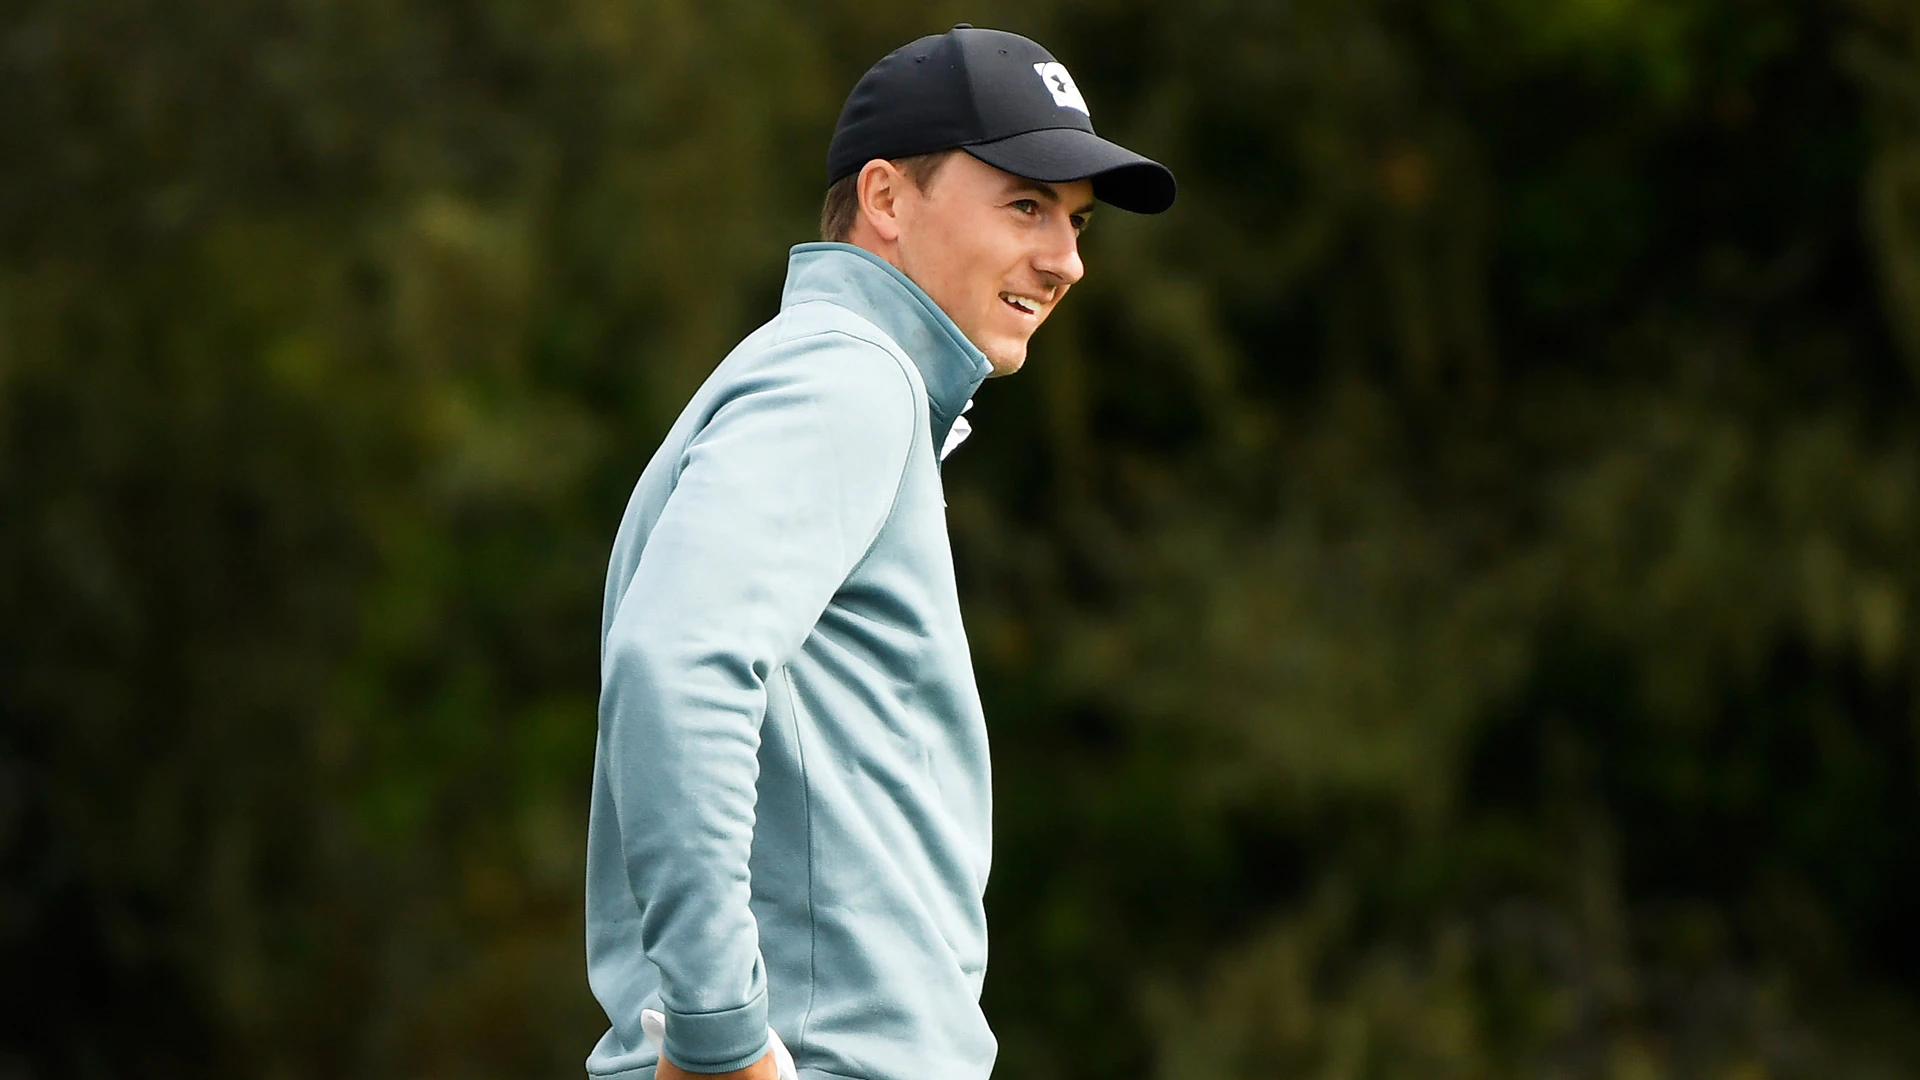 His stomach still not 100%, Jordan Spieth hopes Pebble can be final remedy